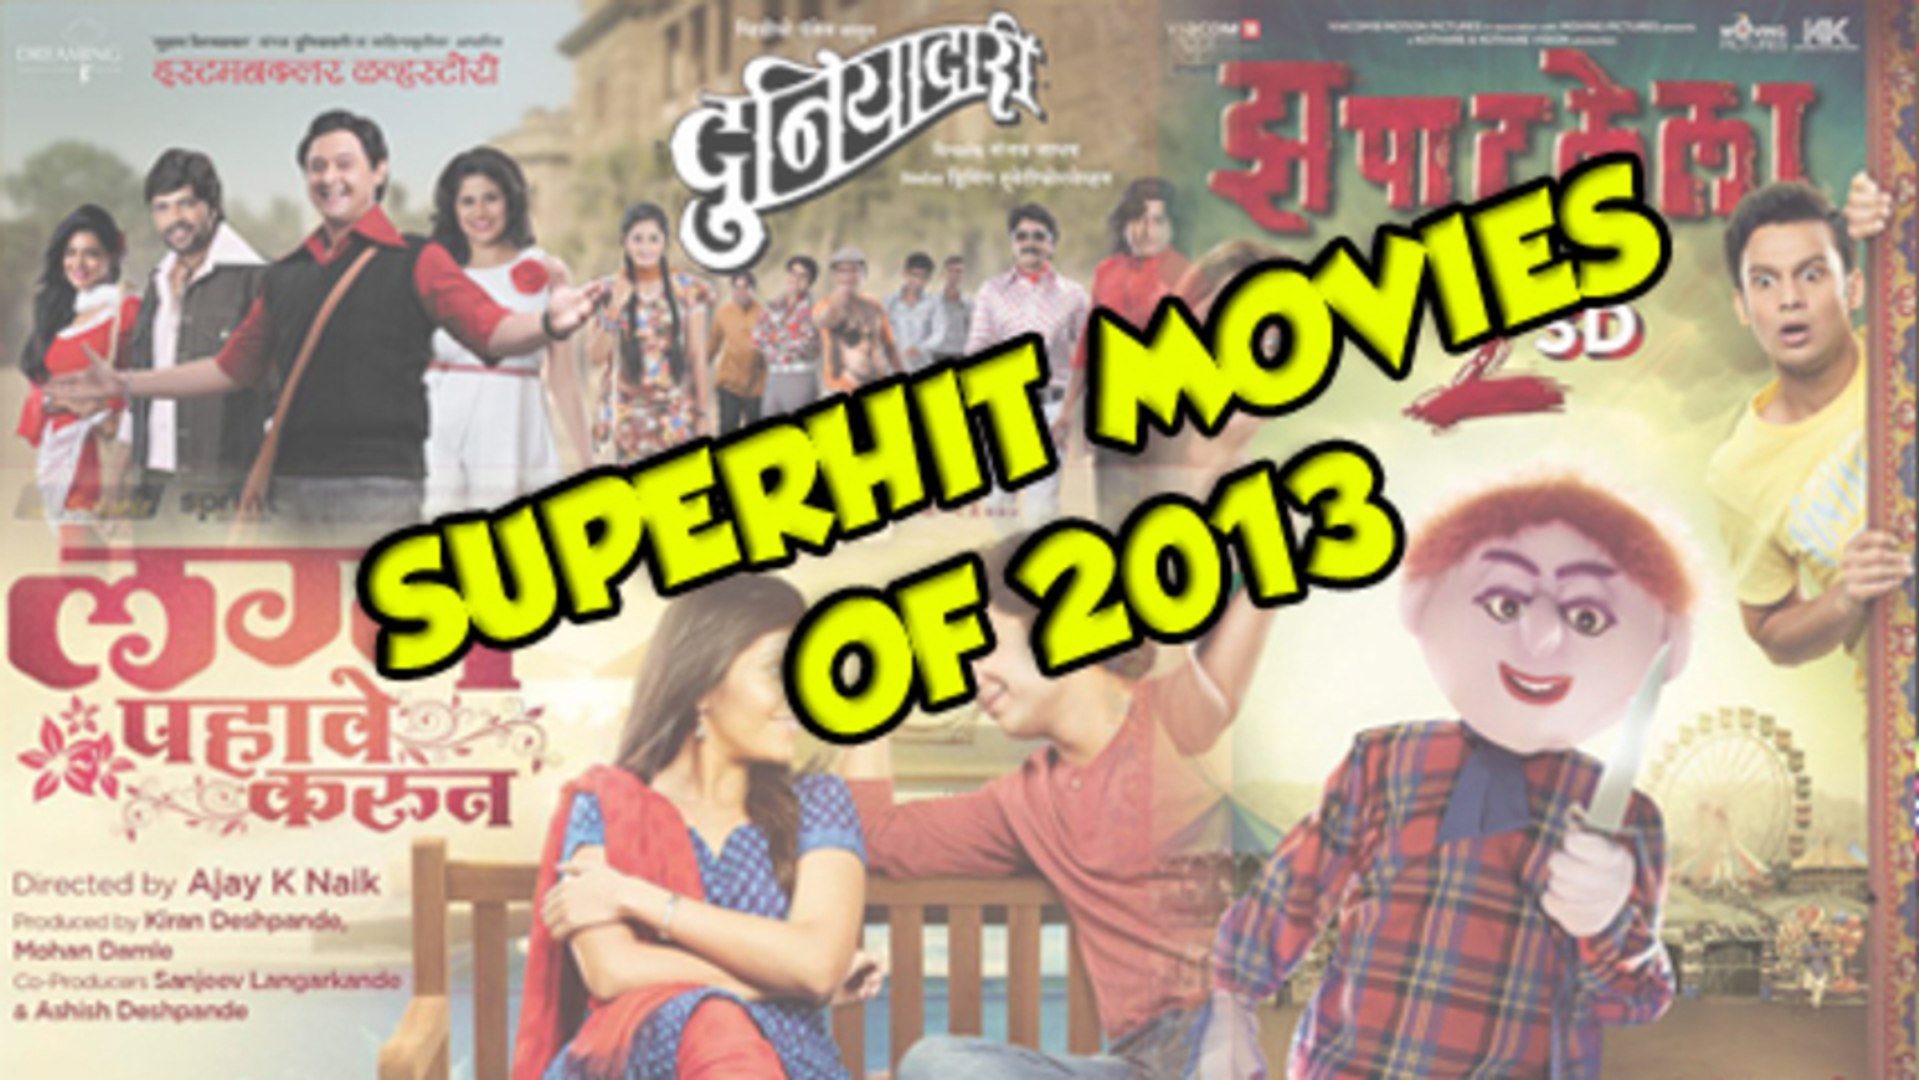 carl aranas recommends new marathi movies youtube pic